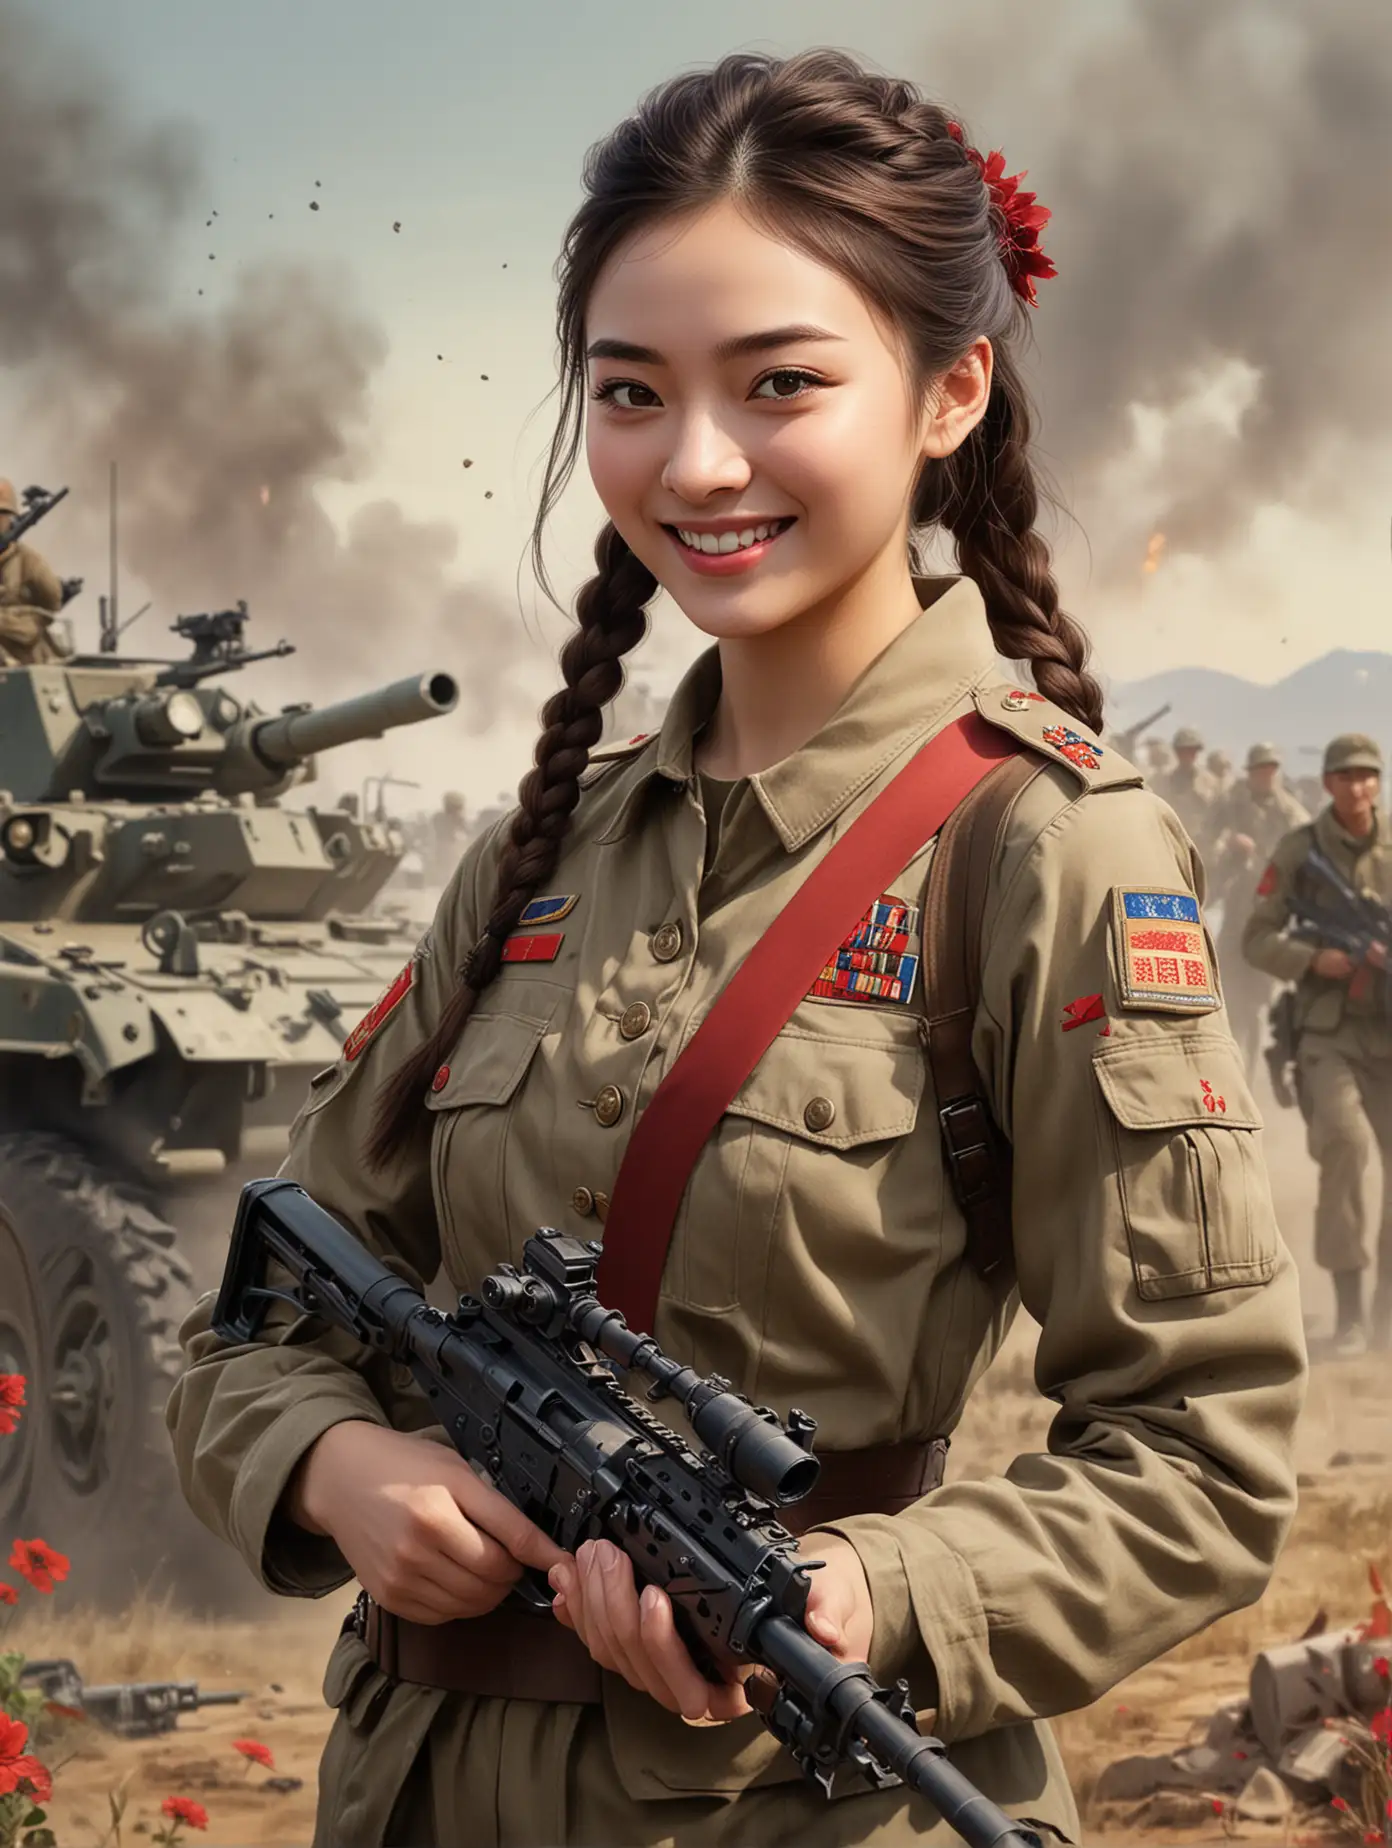 Create an illustration of Jing Tian , approximately 20 years old, with a bright smile on her face. She has long dark brown hair tied back in a loose braid. Her eyes are full of warmth and enthusiasm, colored in a warm shade of brown. Despite being in wartime, she is wearing a tidy military uniform, adorned with feminine touches like flower embellishments on her belt. She wears a red sash over her shoulder as an identifier. While she holds a machine gun in a ready stance, there is a sense of cheerfulness and hope emanating from her facial expression. The background depicts a busy battlefield scene, with combat vehicles and other soldiers in action behind her, but the focus remains on the cheerful presence of this character amidst the chaos of war.